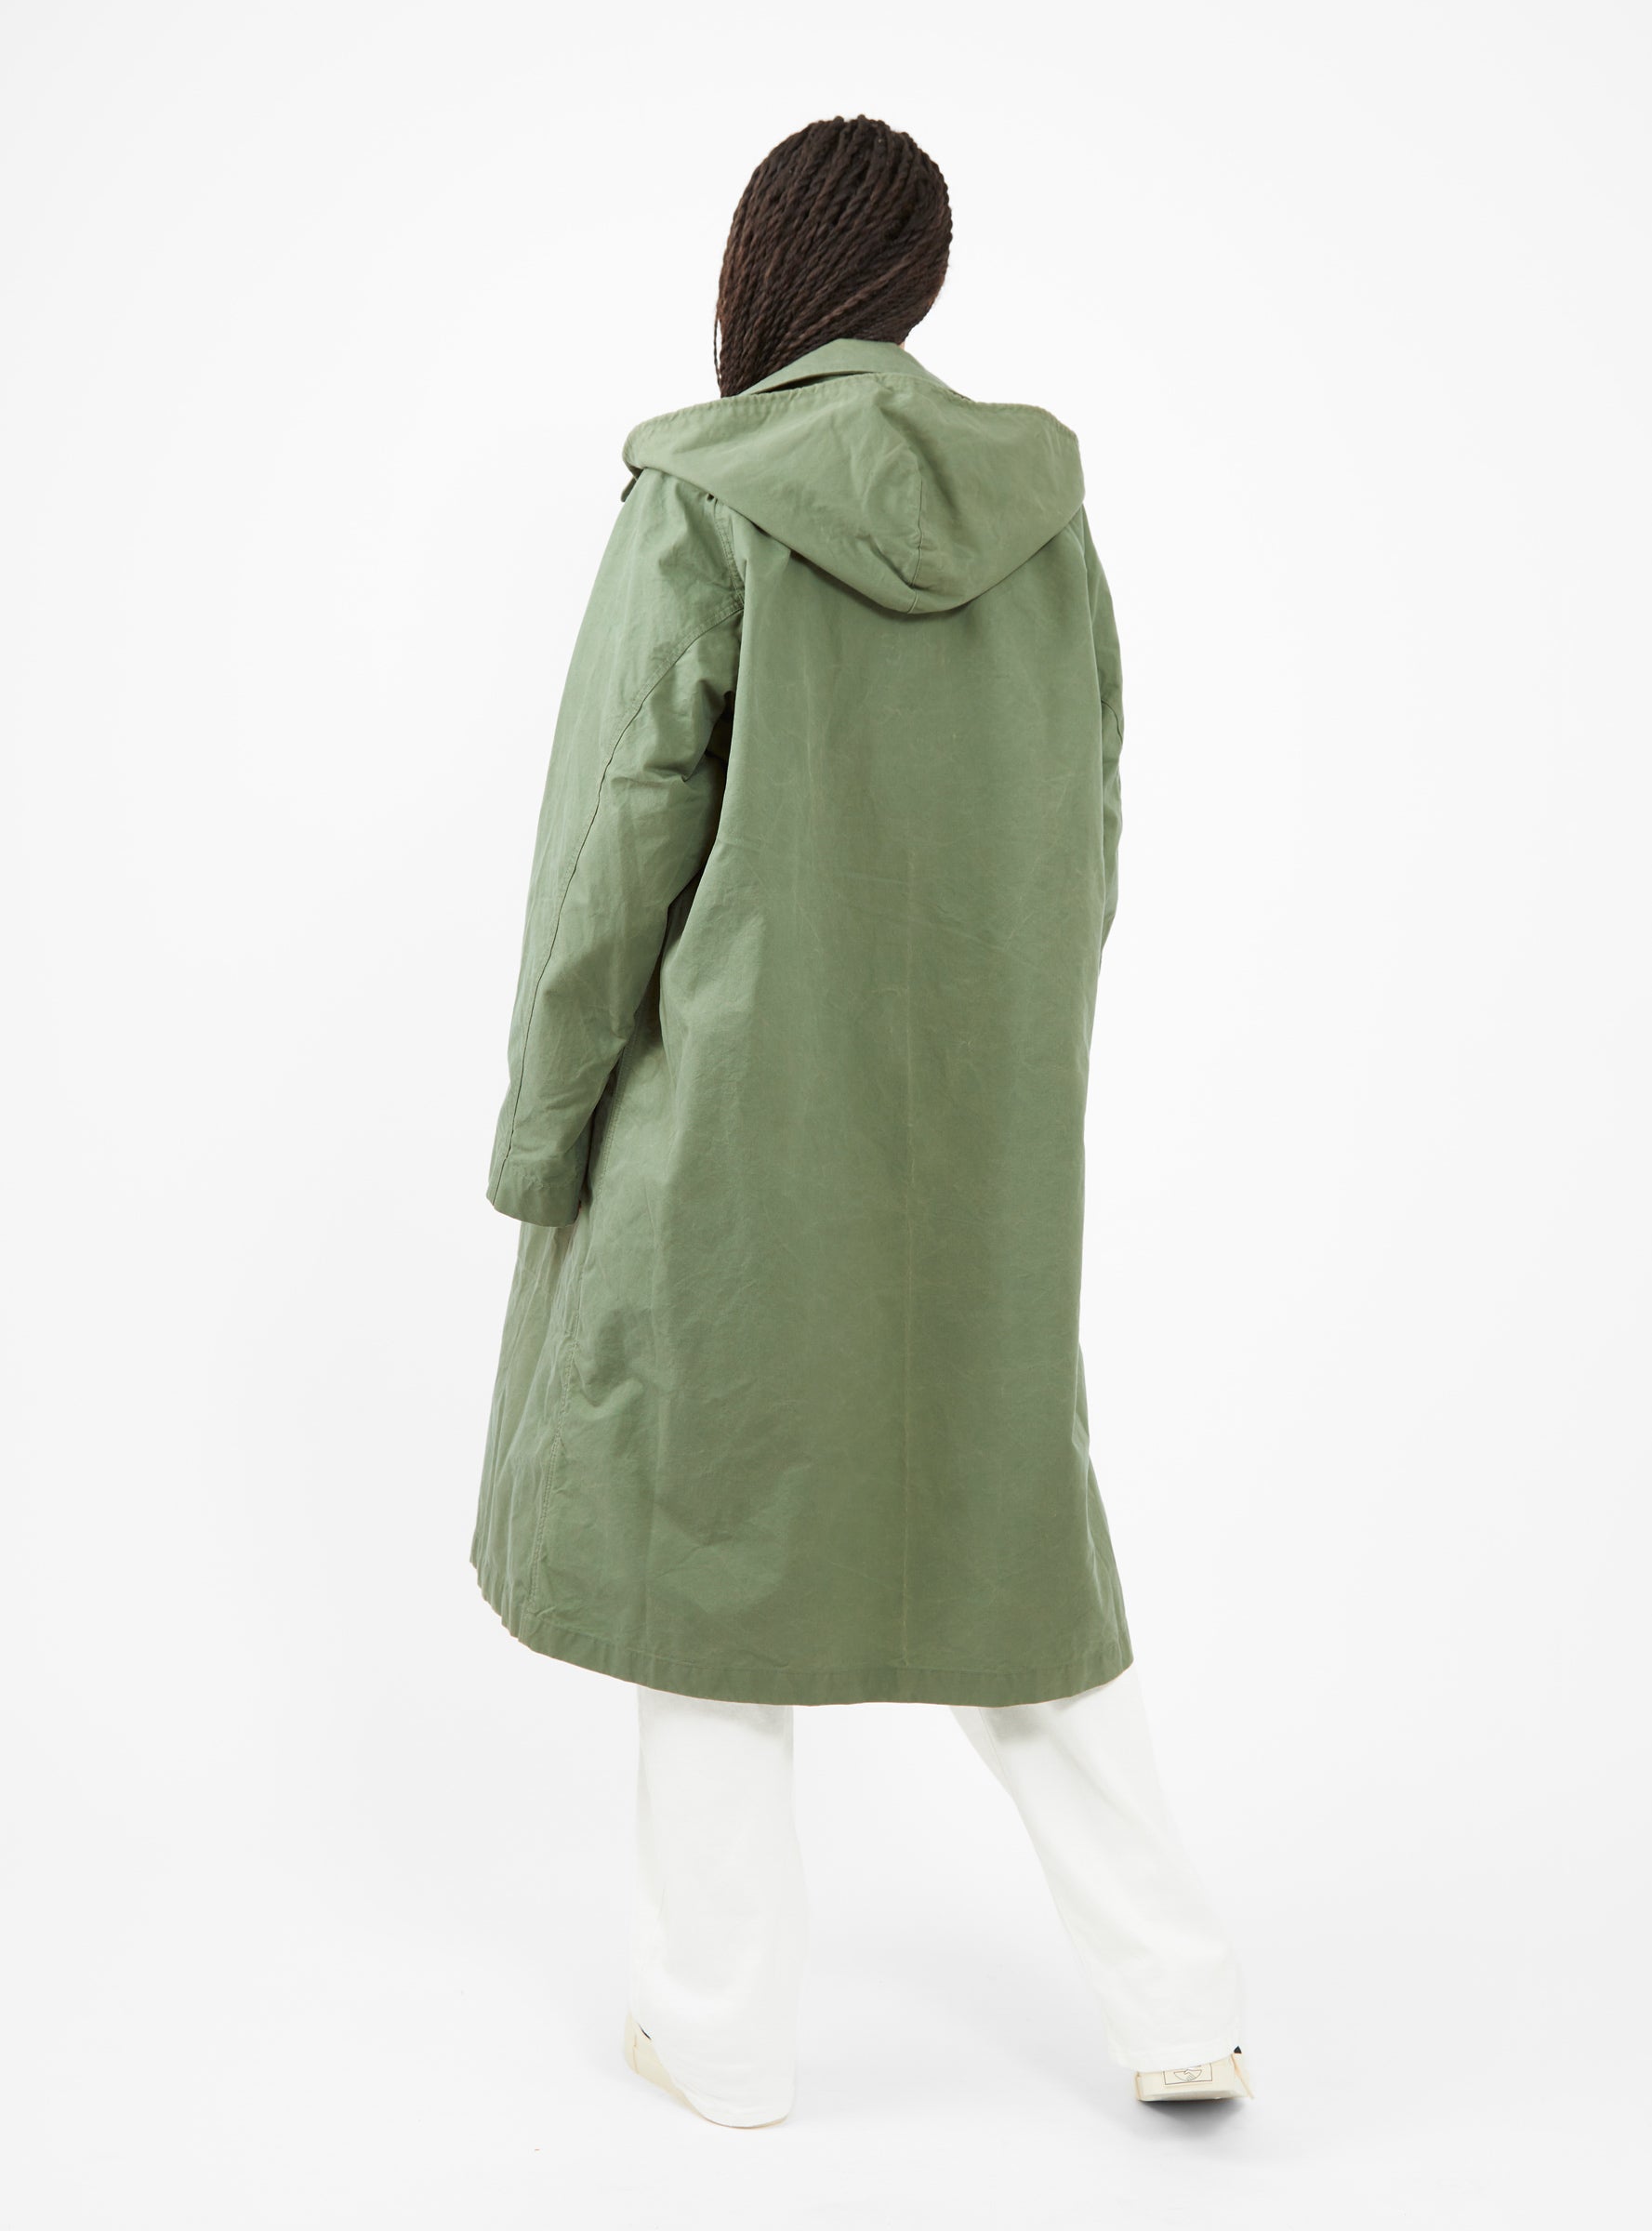 Army Waxed Cotton Trench Coat Marshal Green by Girls of Dust ...